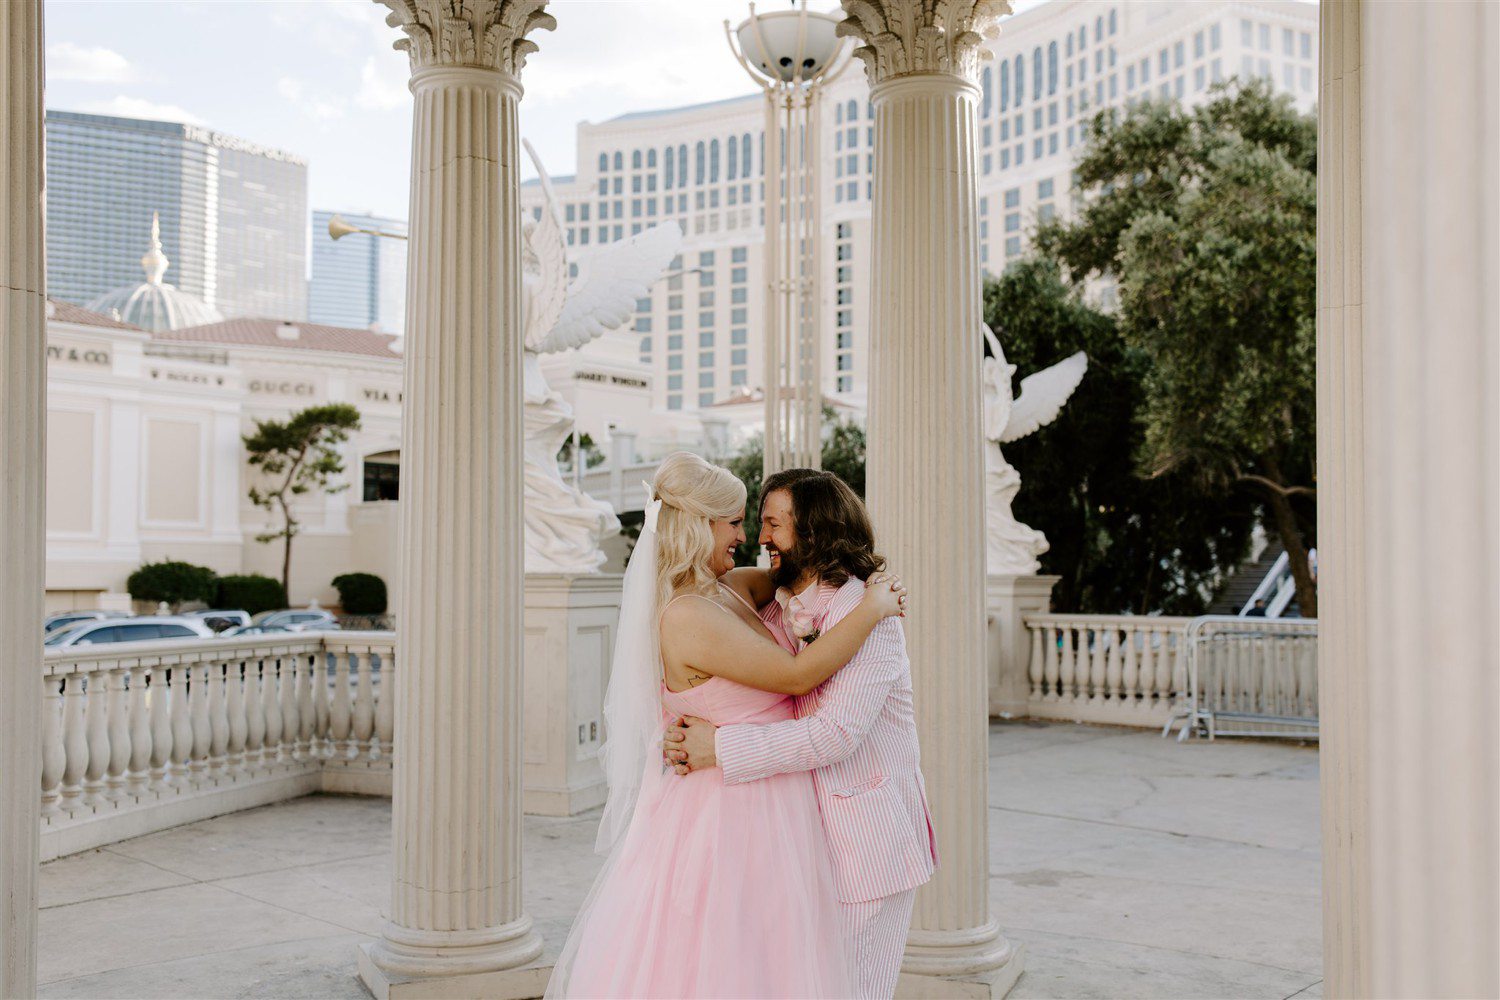 Bride wearing a pink wedding dress and groom in pink suit for Las Vegas wedding.